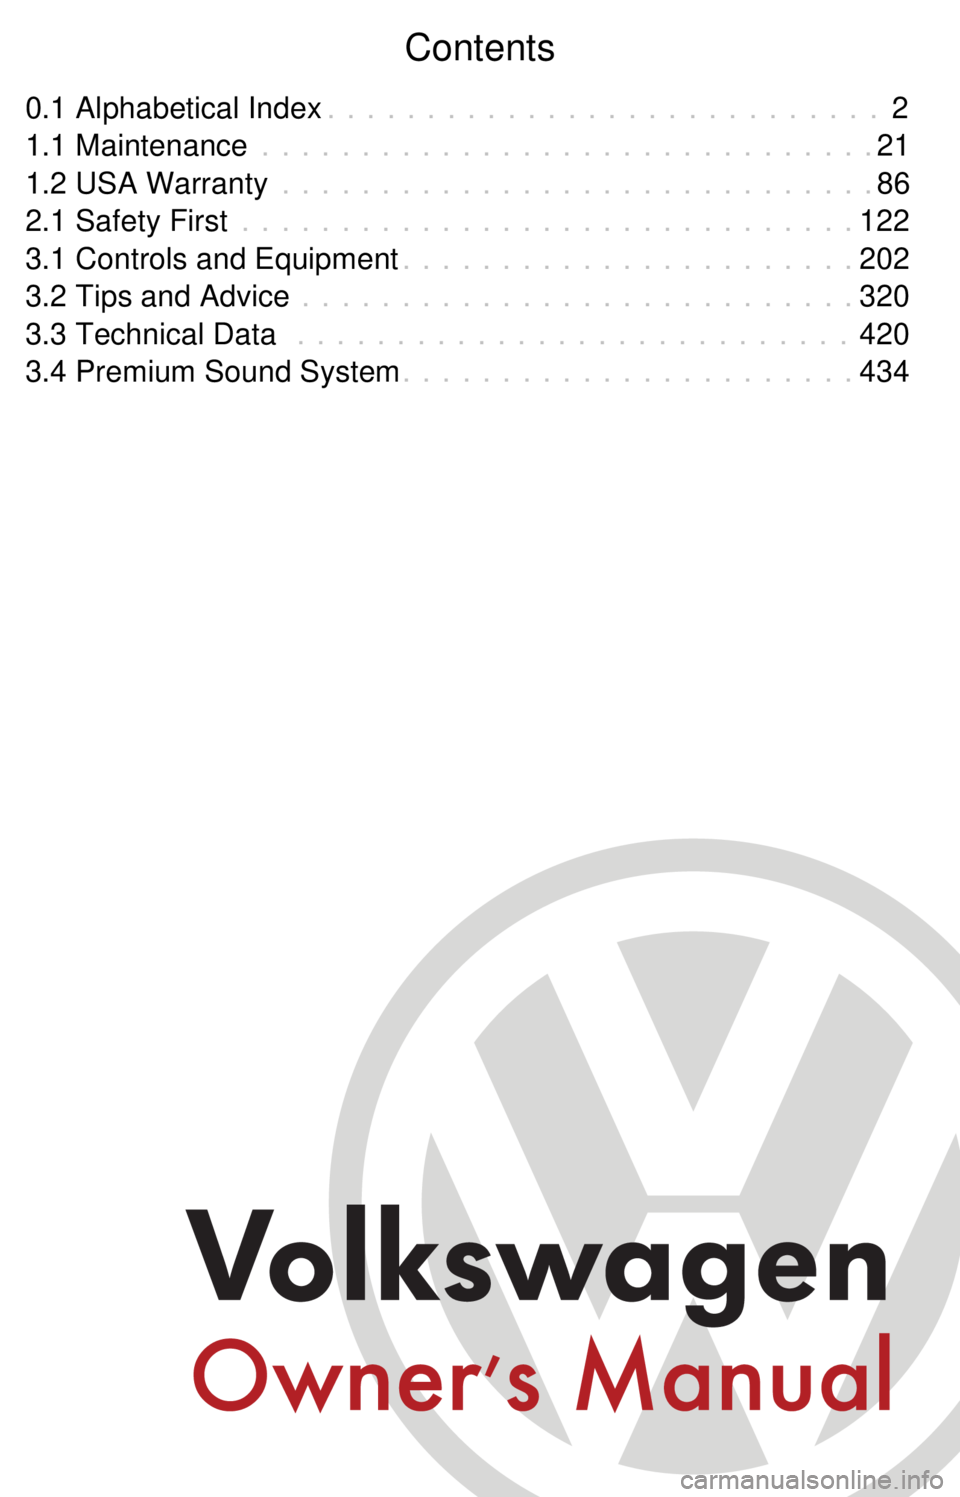 VOLKSWAGEN JETTA 2008  Owners Manual Contents
0.1 Alphabetical Index 2
. . . . . . . . . . . . . . . . . . . . . . . . . . . .
1.1 Maintenance 21
. . . . . . . . . . . . . . . . . . . . . . . . . . . . . . .
1.2 USA Warranty 86
. . . . .